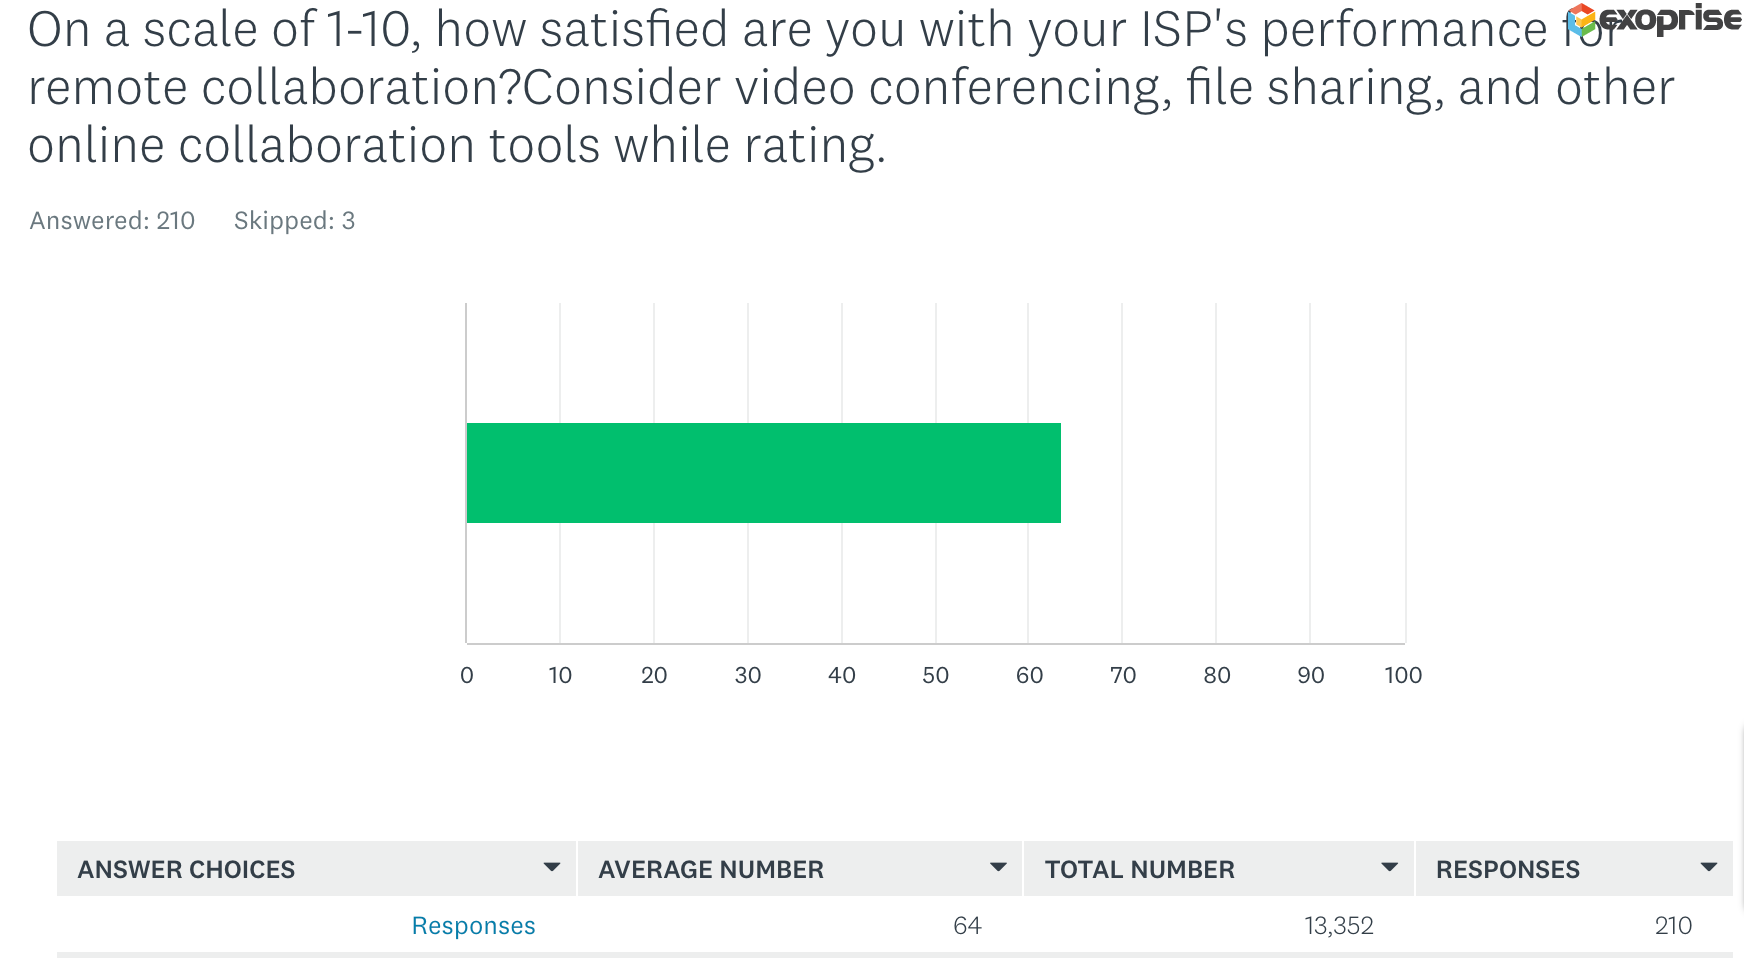 Are you satisified with your ISP performance?